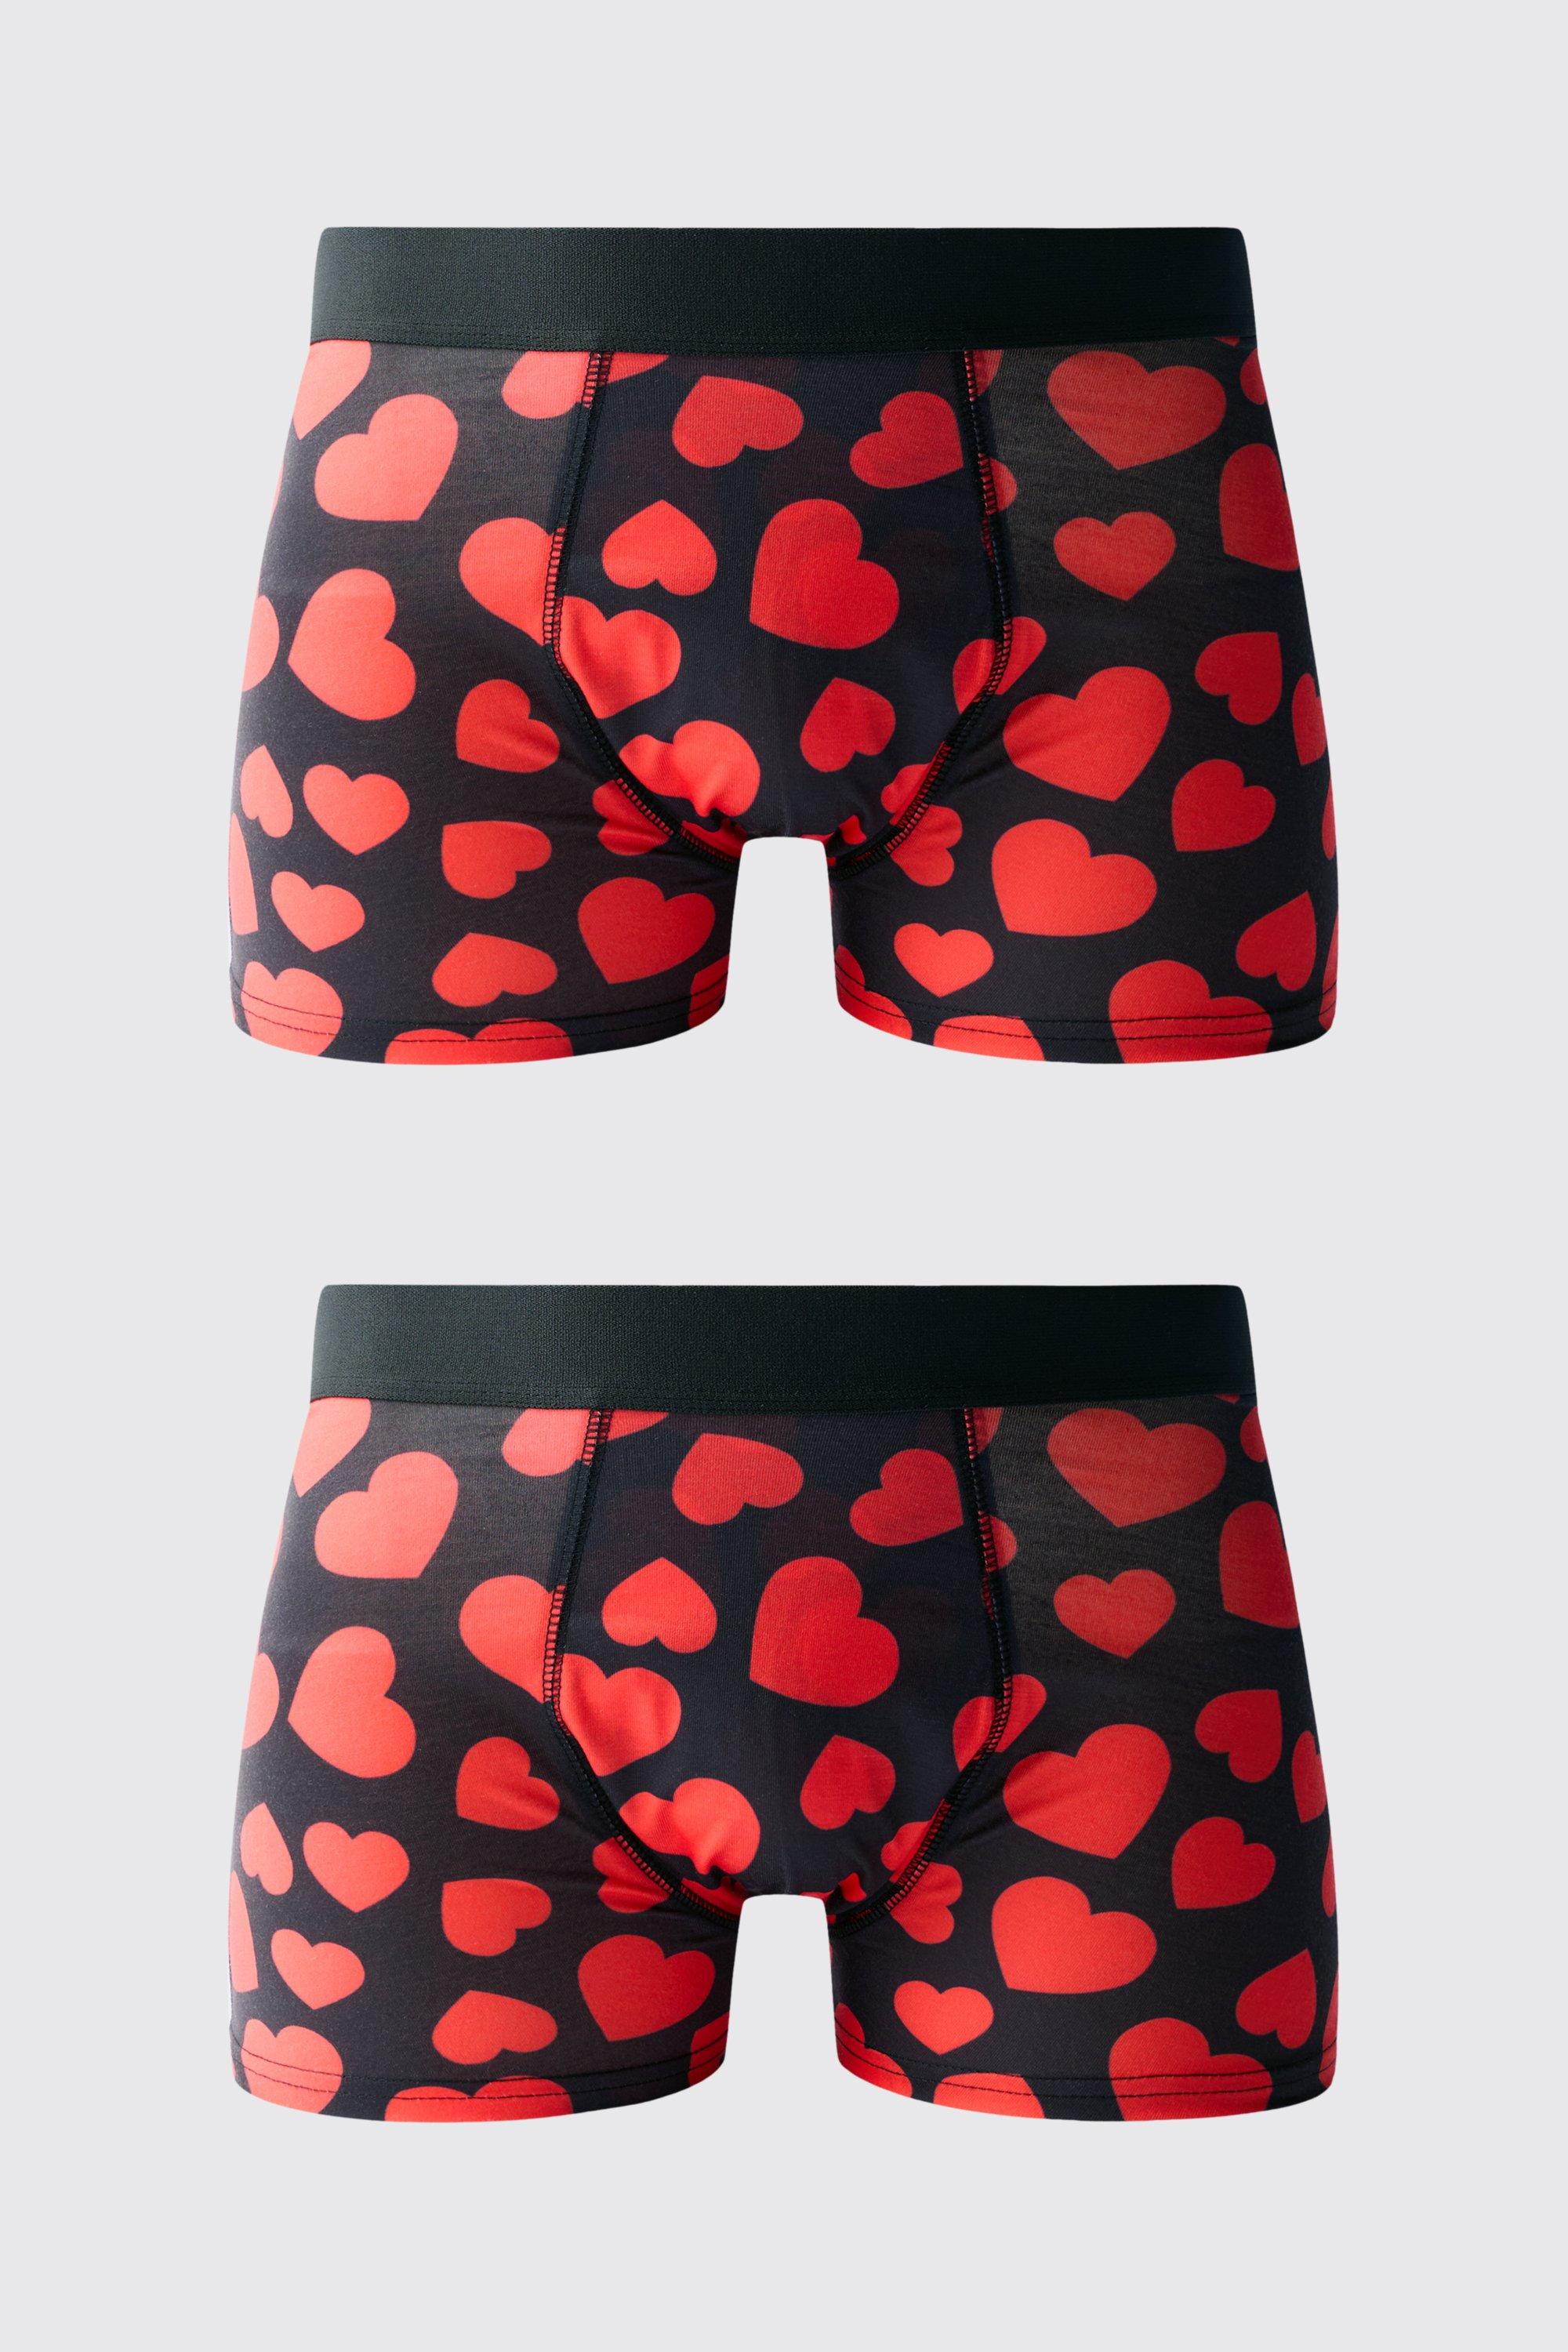 Valentines Day Boxers – The Happy Pallet Shirt Co